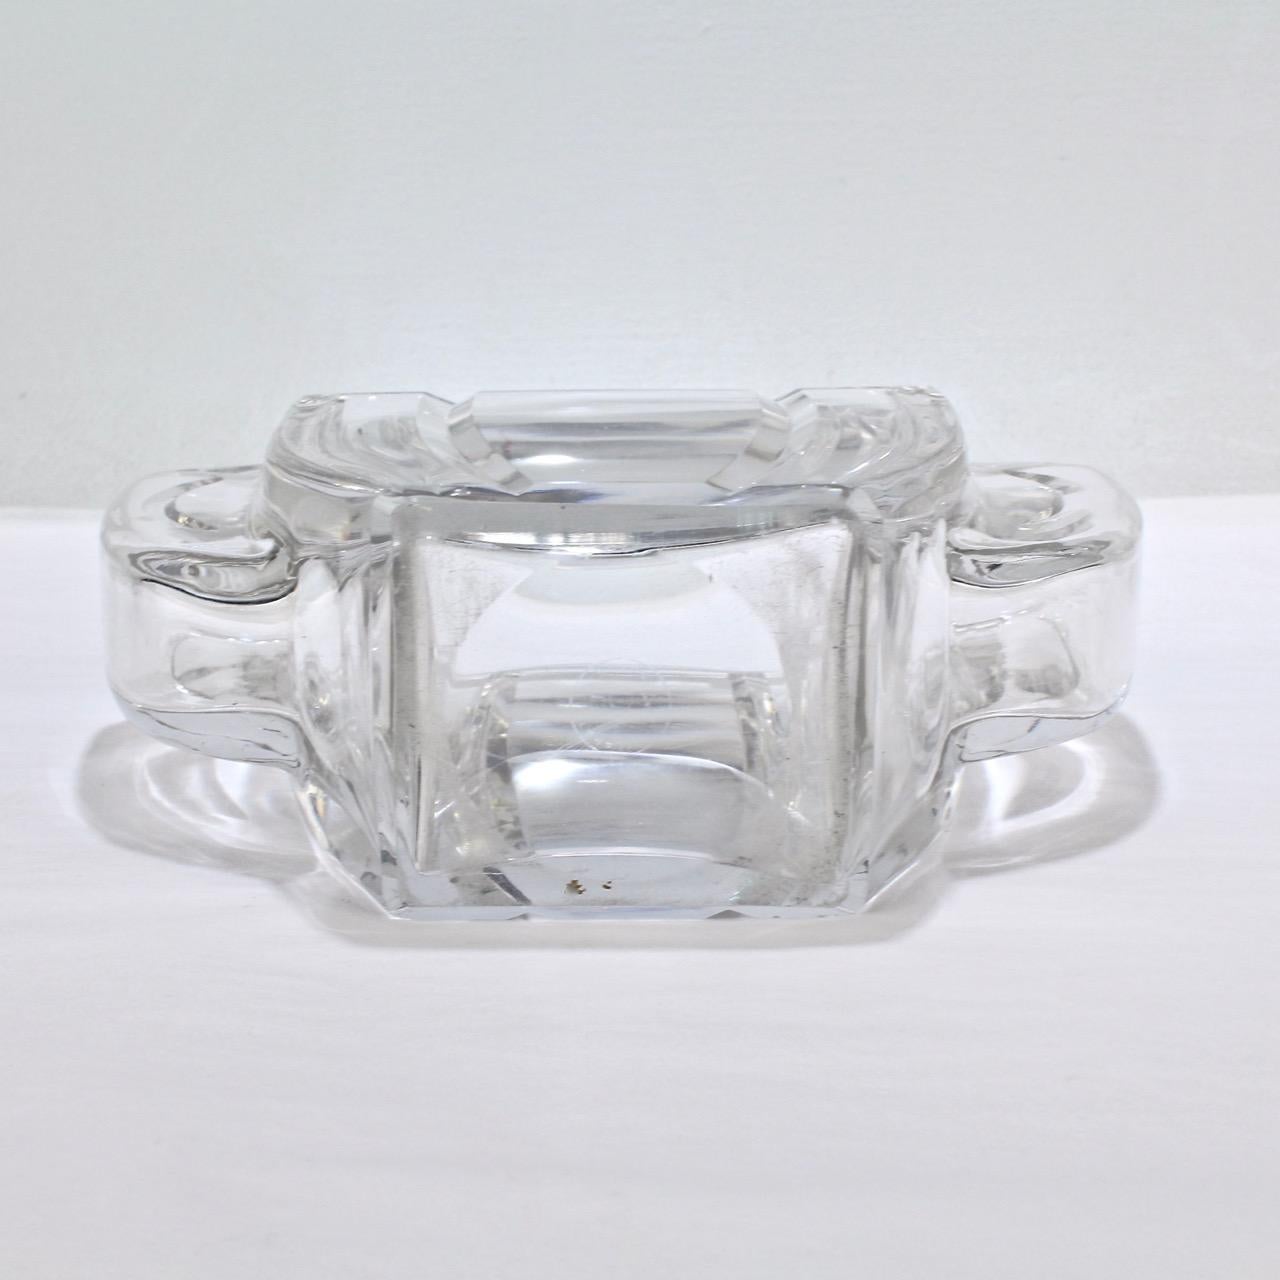 Art Deco Baccarat Twin-Handled Glass or Crystal Vase For Sale 1